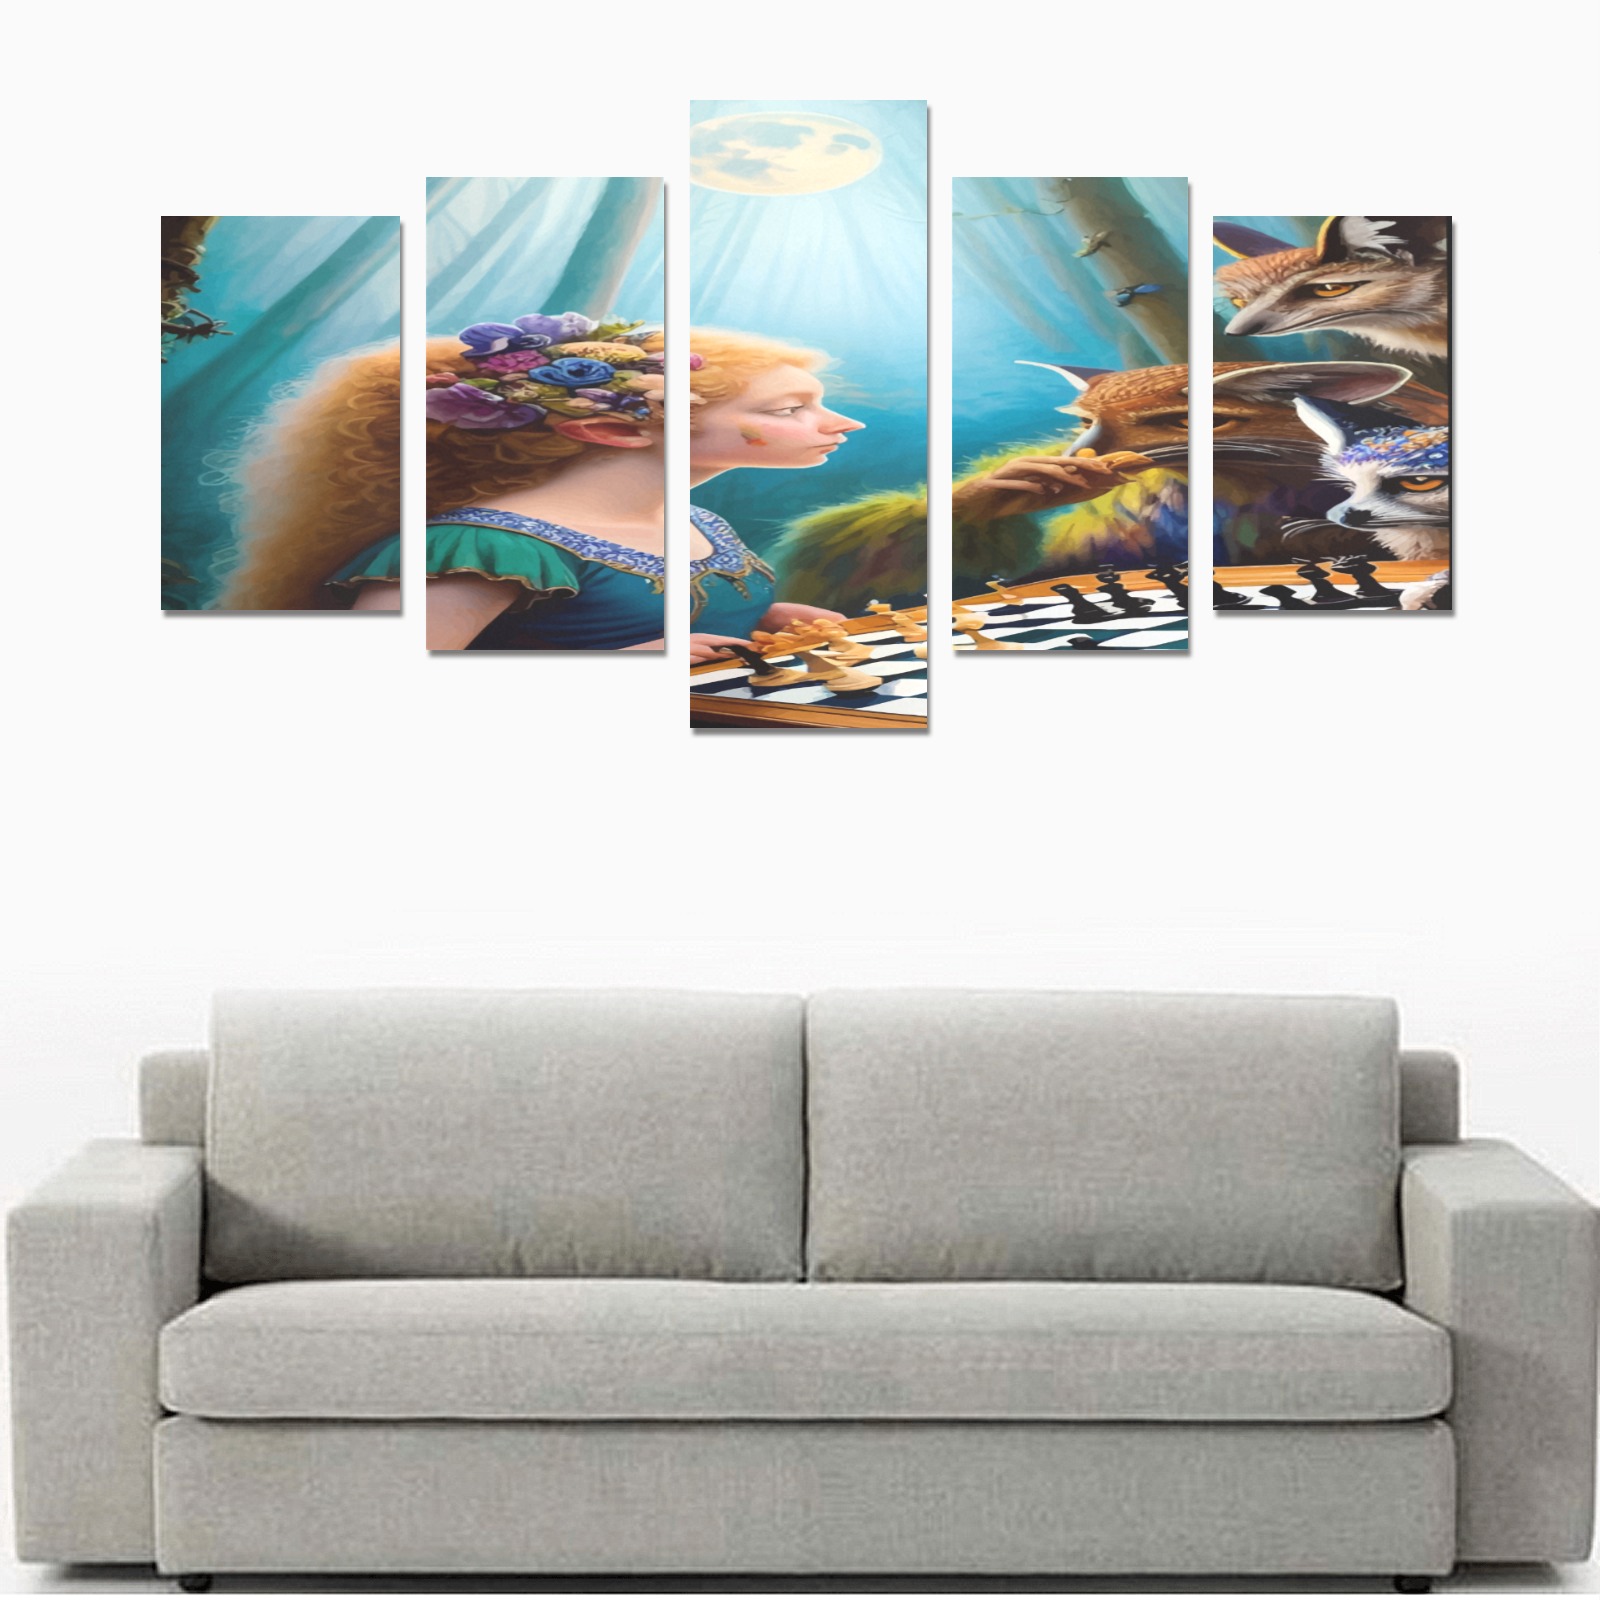 The Call of the Game 6_vectorized Canvas Print Sets C (No Frame)